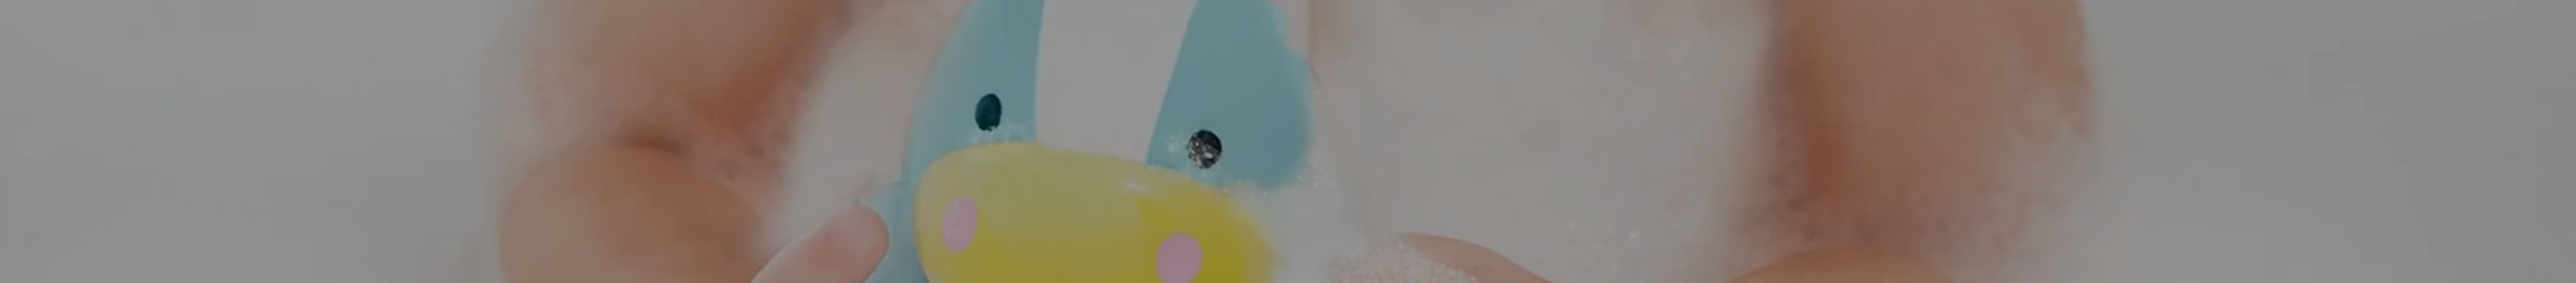 Little girl playing in the bath with a Skip Hop unicorn bath toy